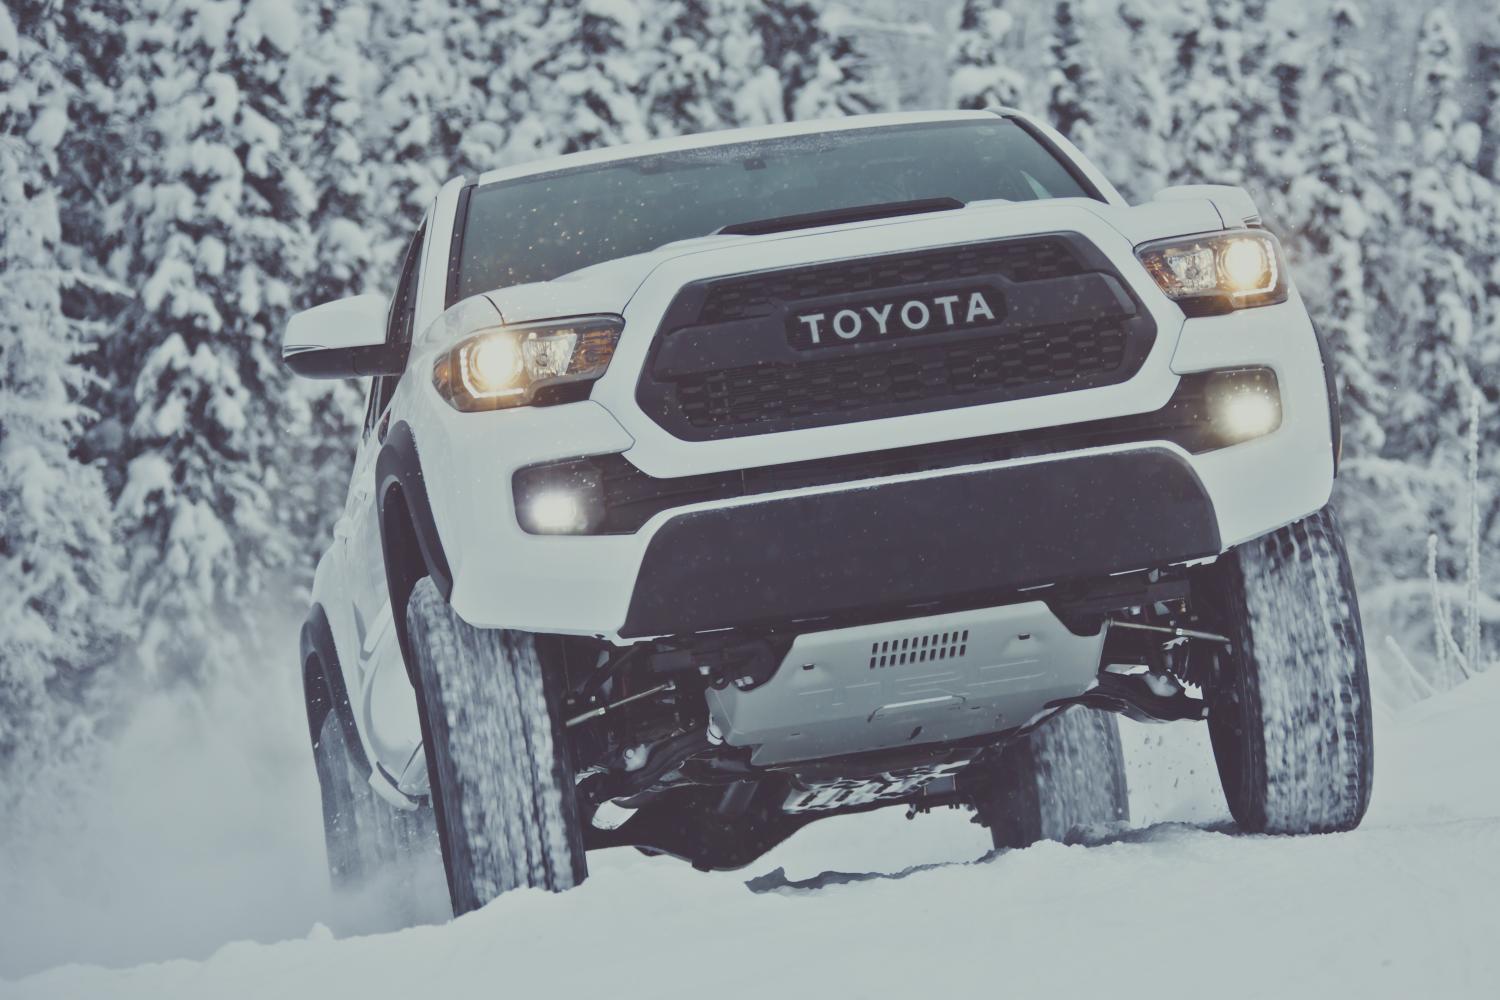 Toyota Tacoma, one of Toyota's's top selling vehicles in the USA in 2017